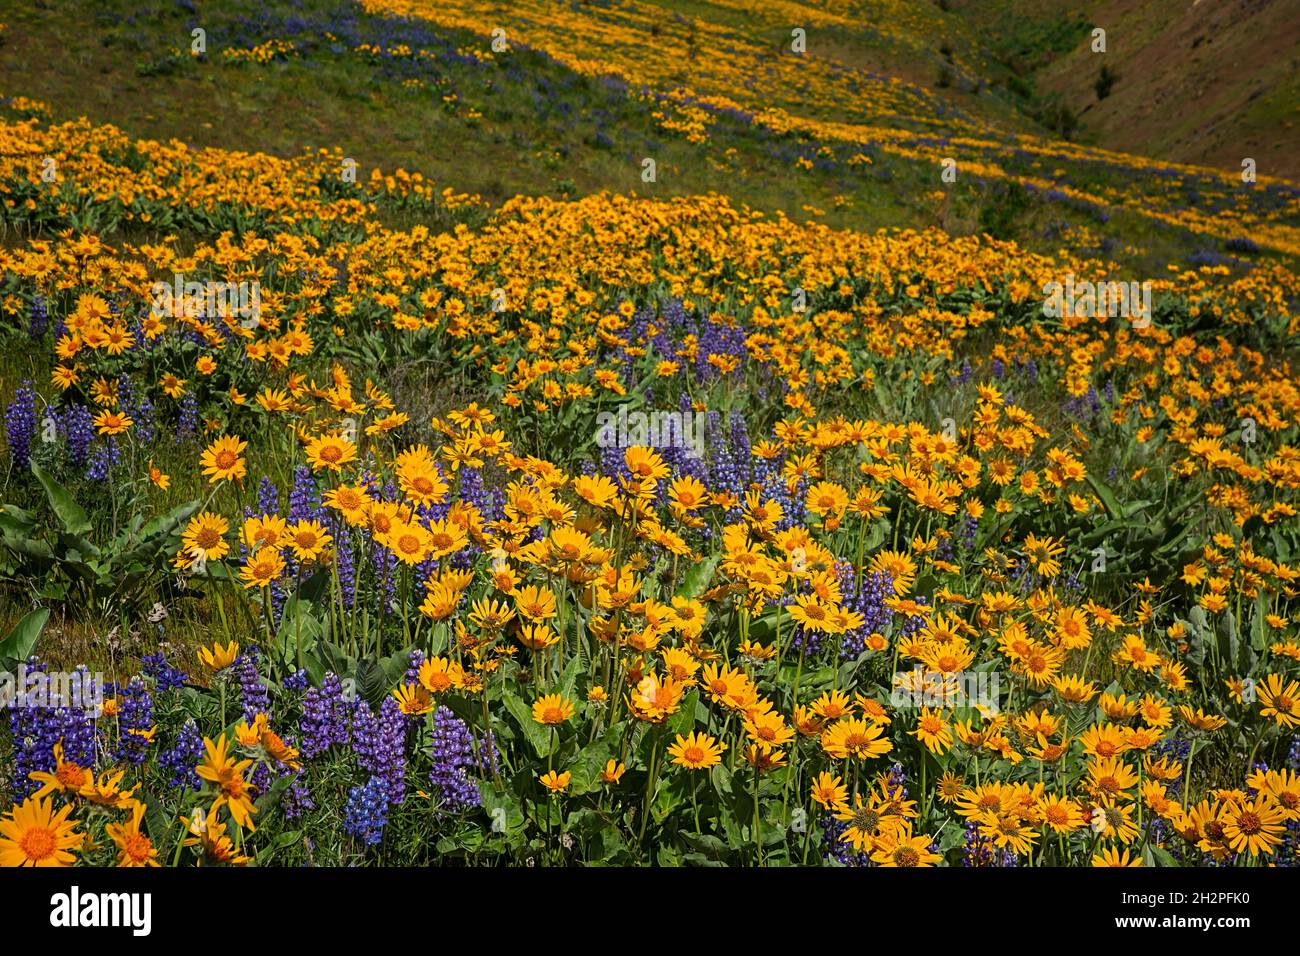 WA19709-00...WASHINGTON - Balsamroot and lupine blooming along the Sage Hills Trail above the town of Wenatchee. Stock Photo